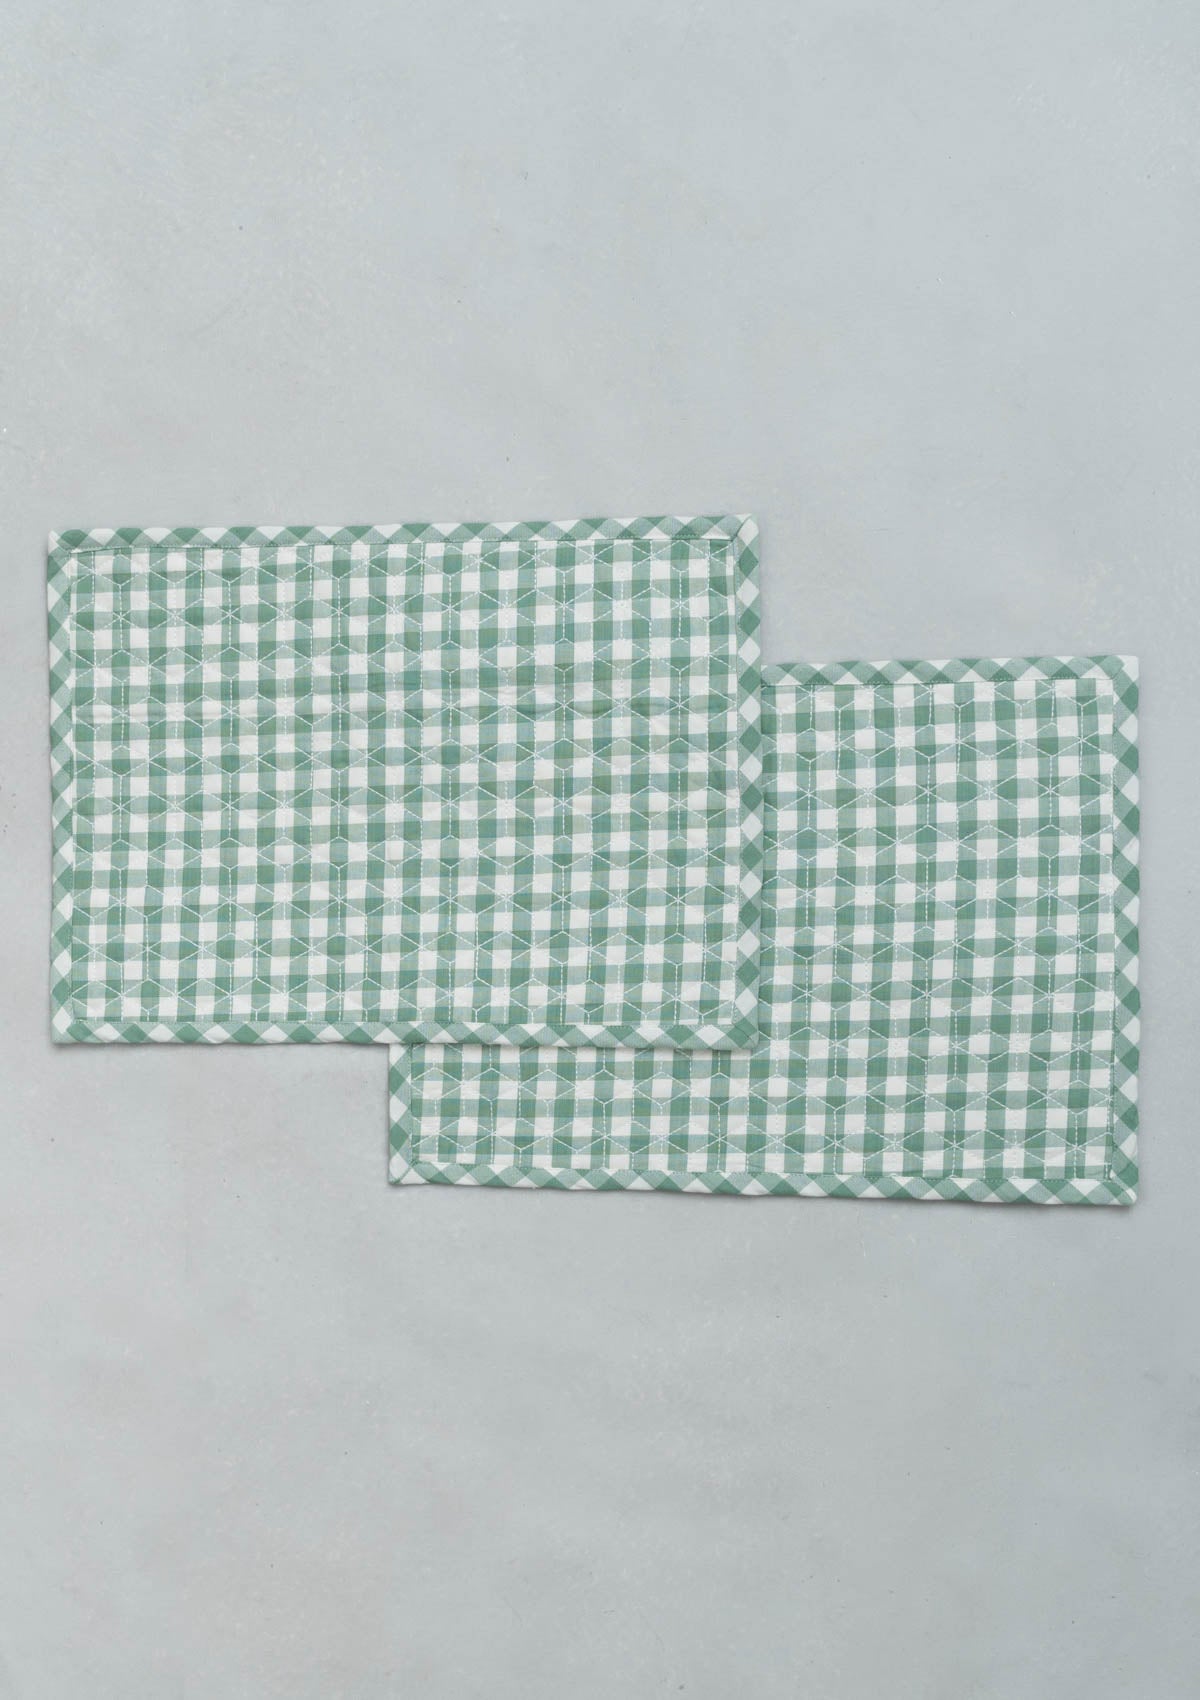 Solid sage green gingham Placemats - Sage Green